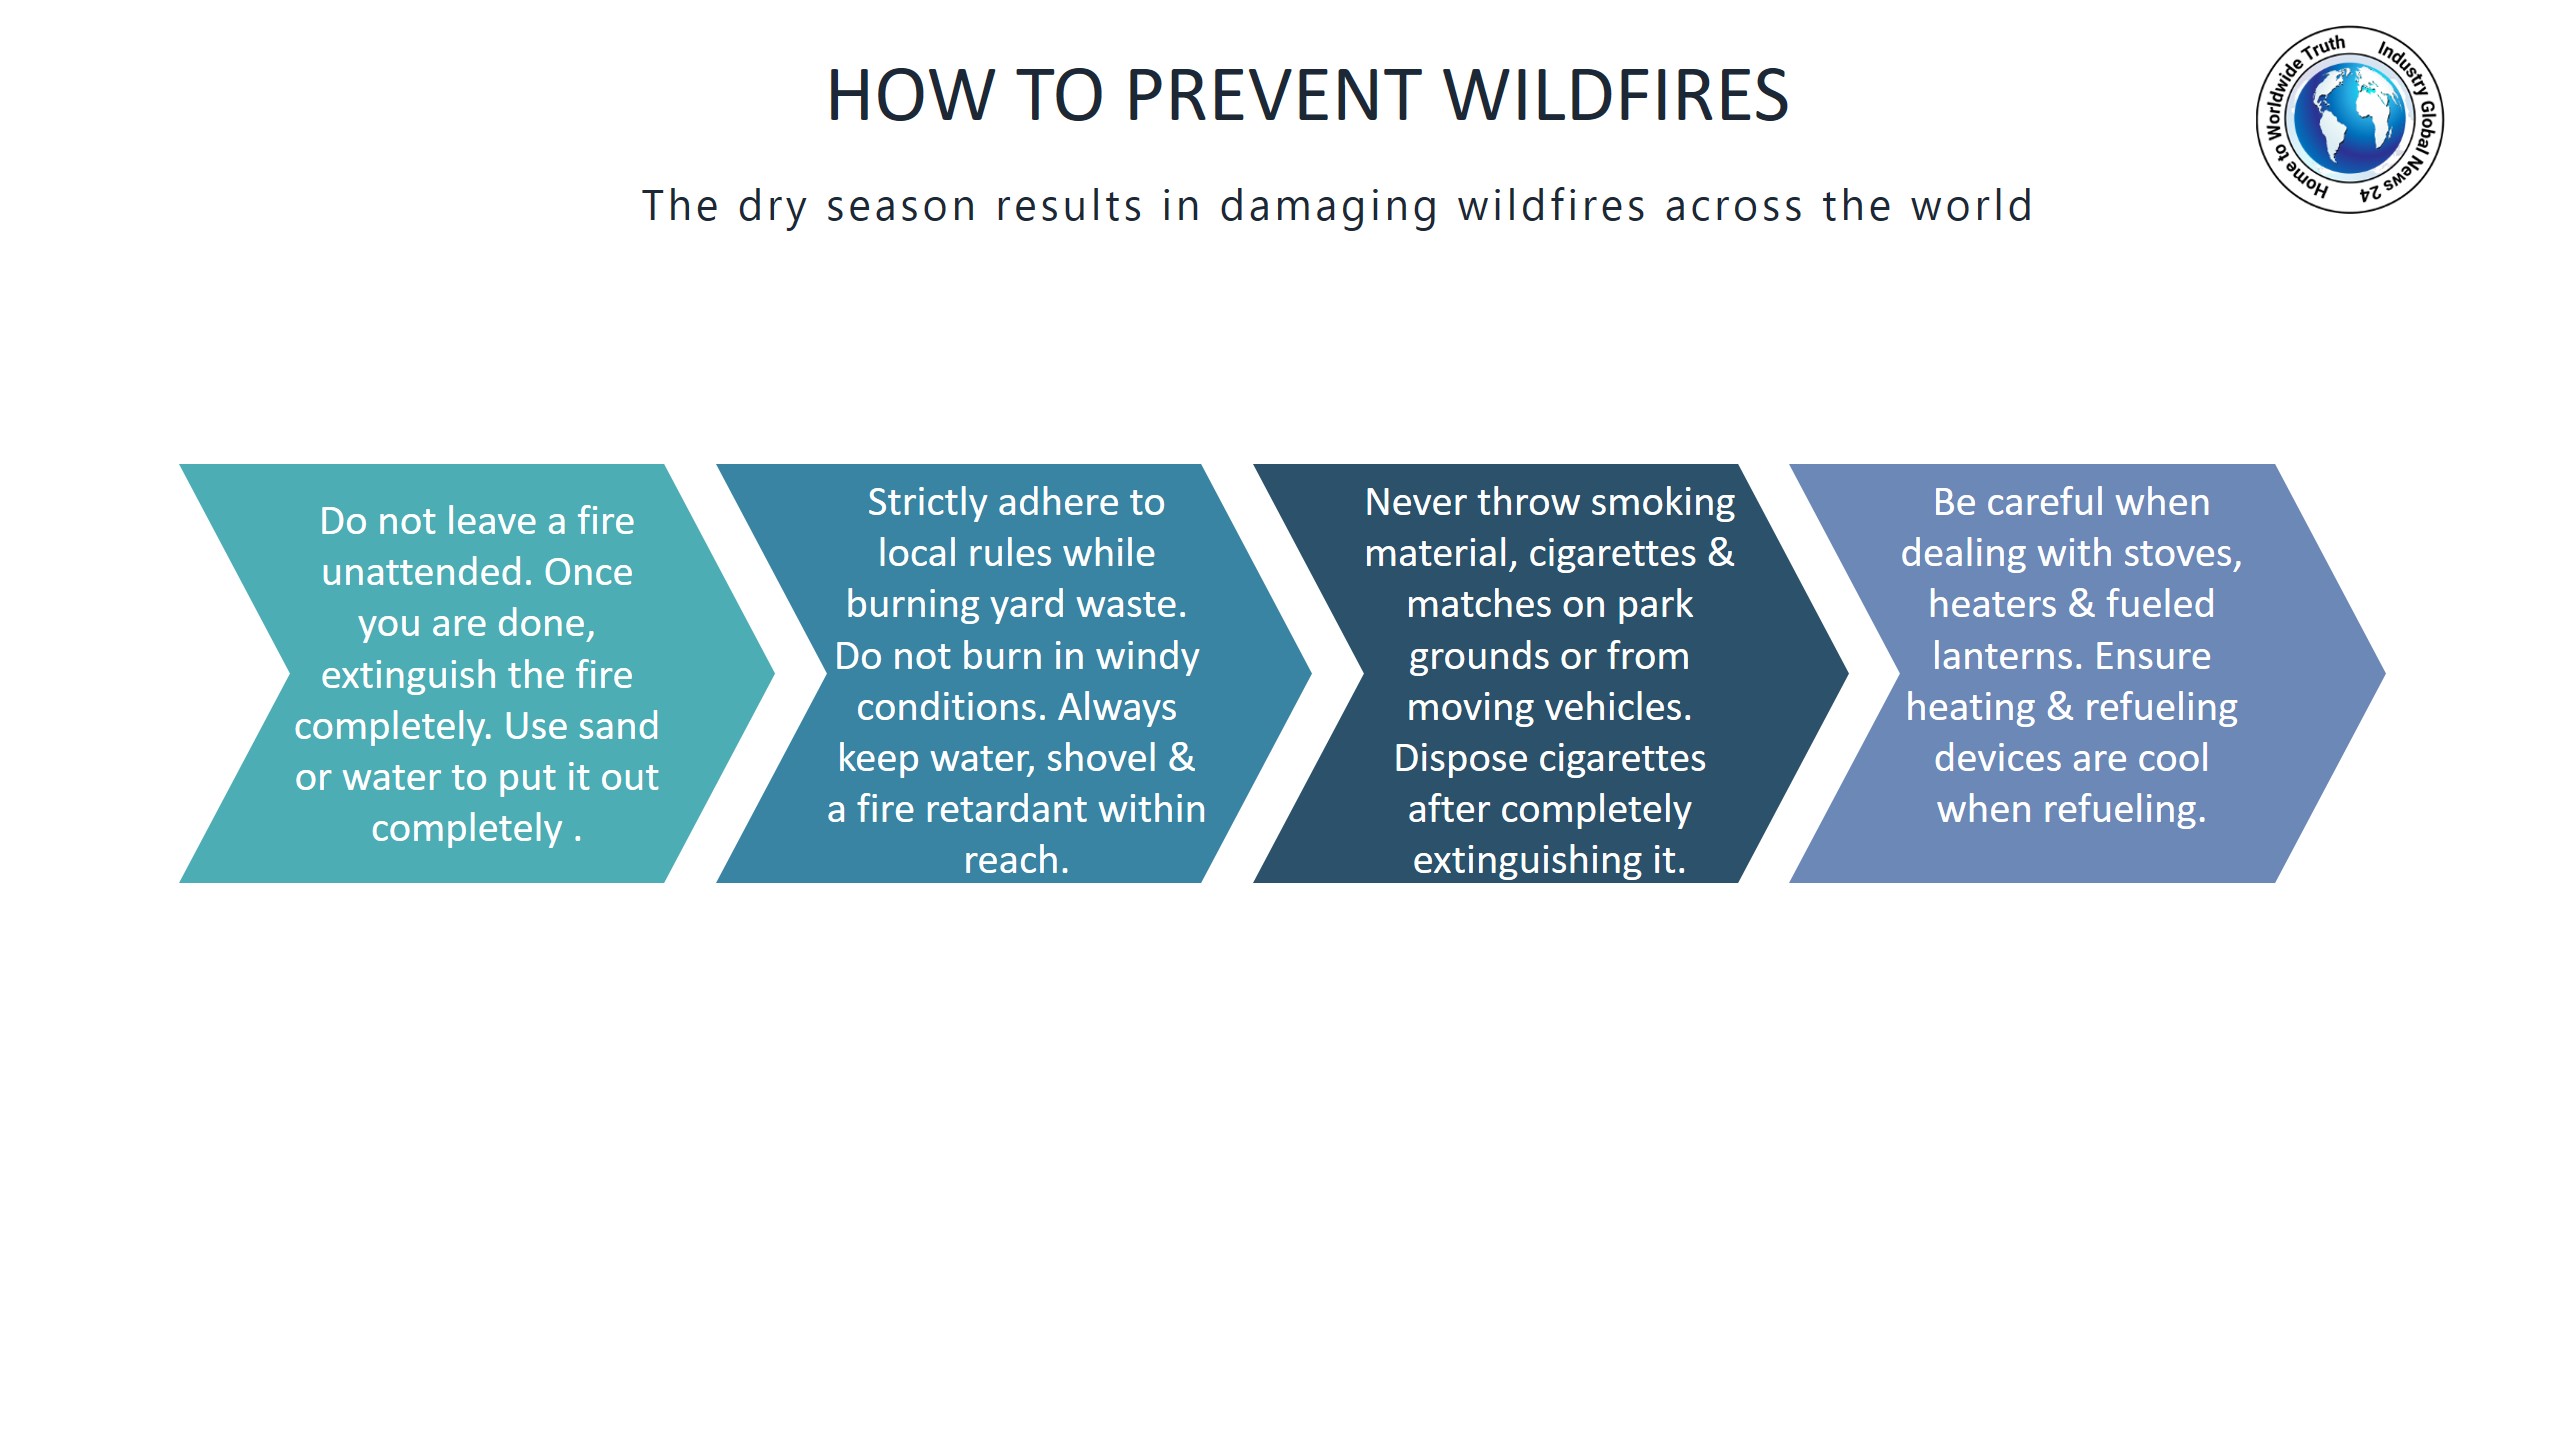 How to prevent wildfires